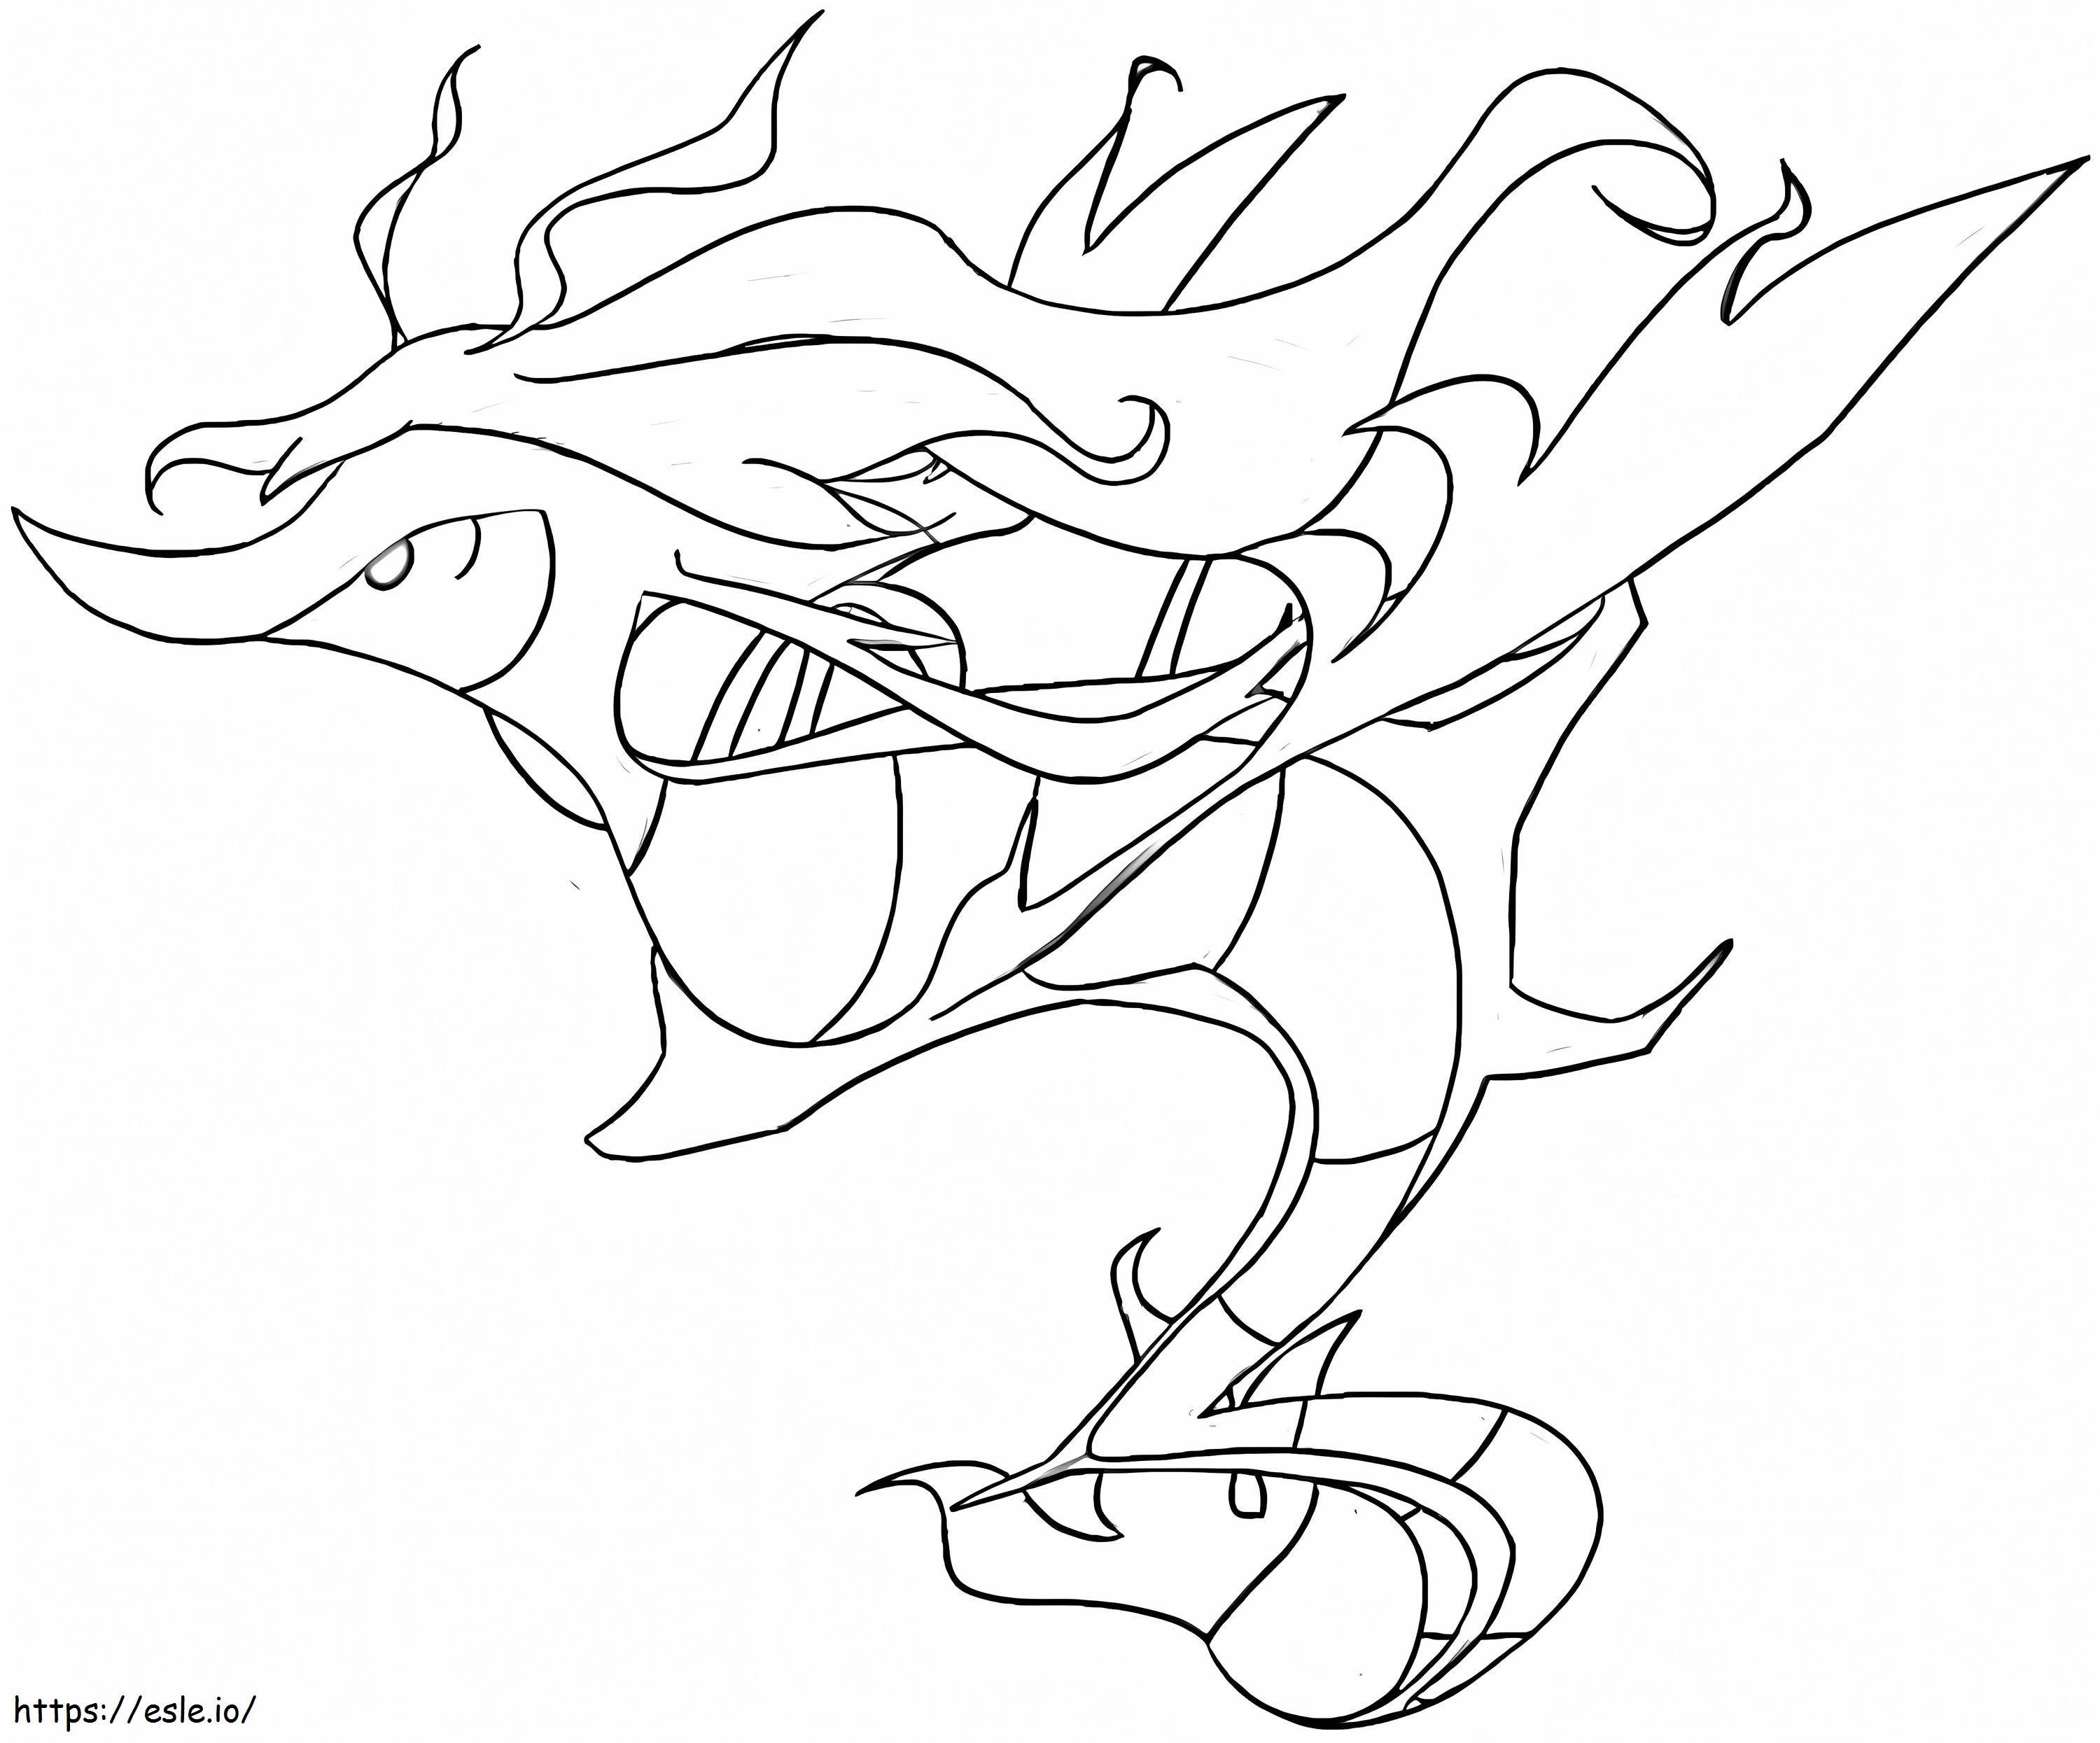 Draggale Pokemon 3 coloring page